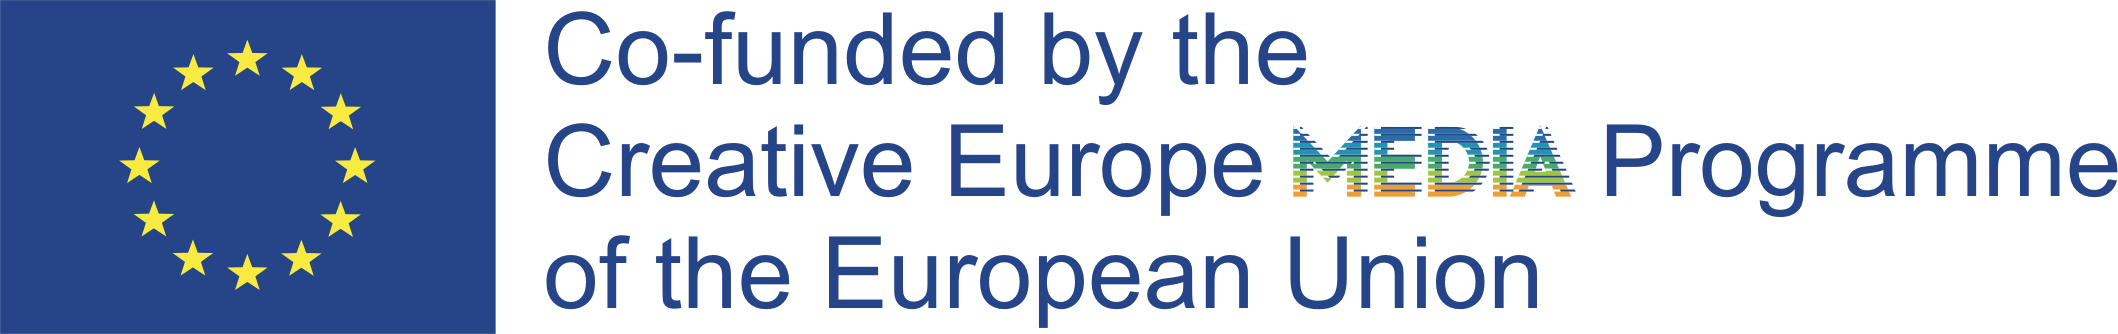 Co-funded by the Creative Europe MEDIA Programme of the European Union